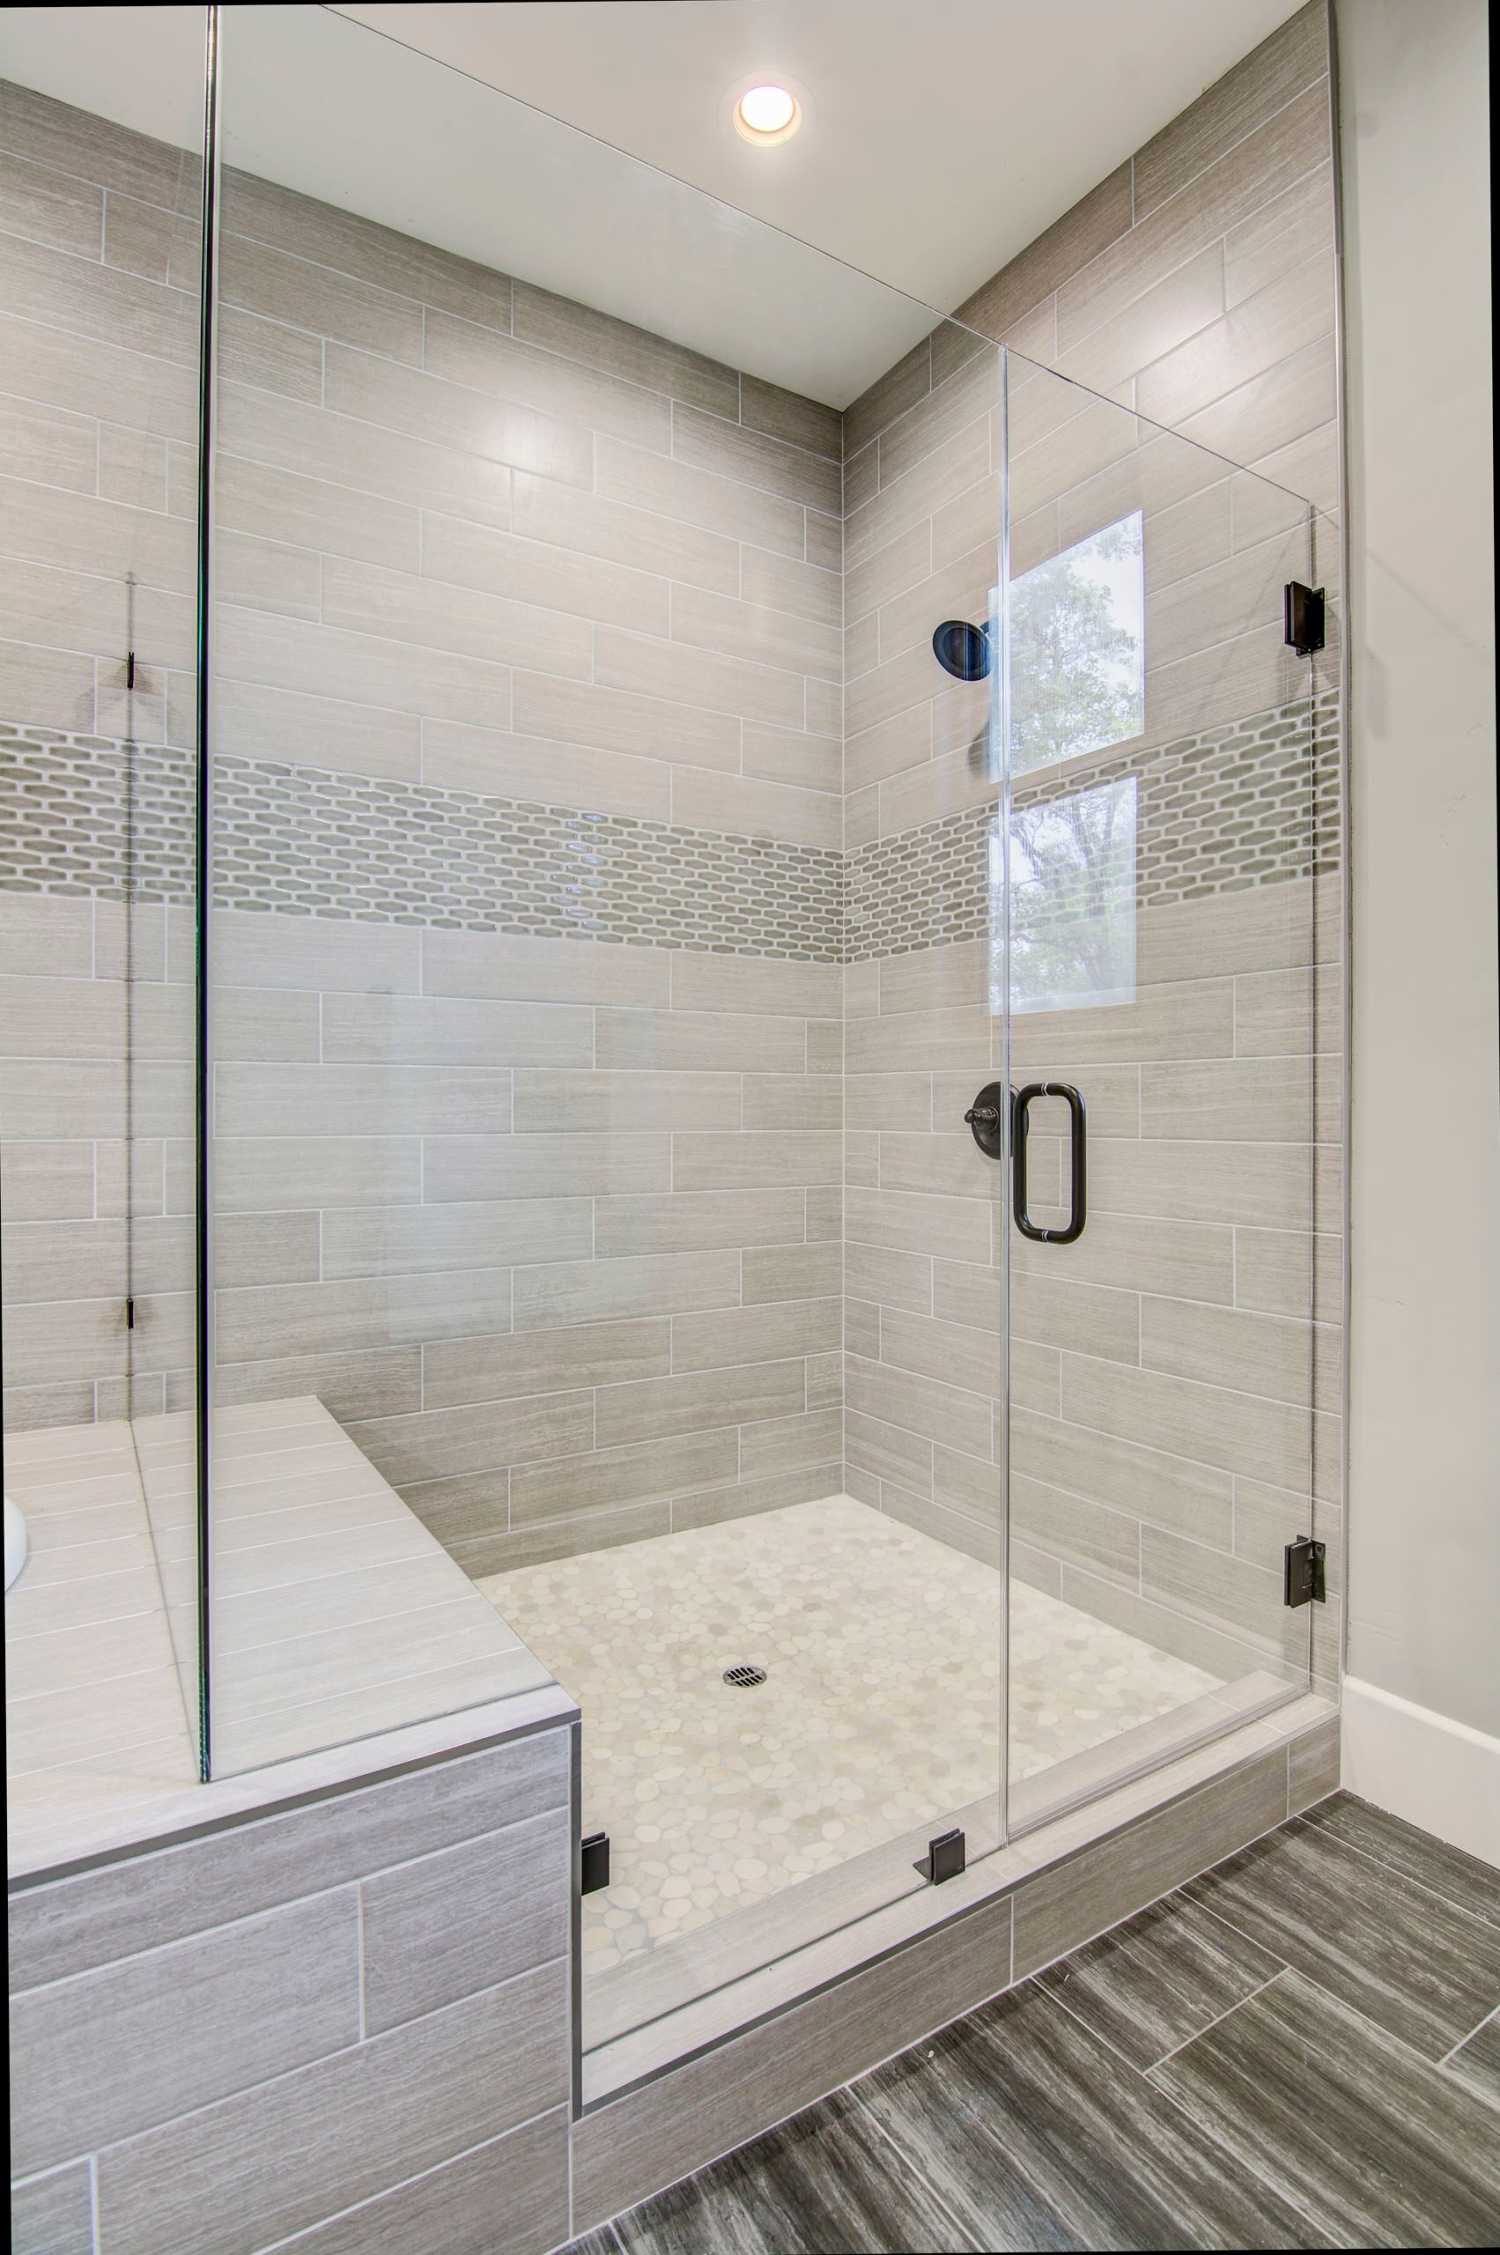 Bathroom remodel - concerned with grout color choice : r/Remodel